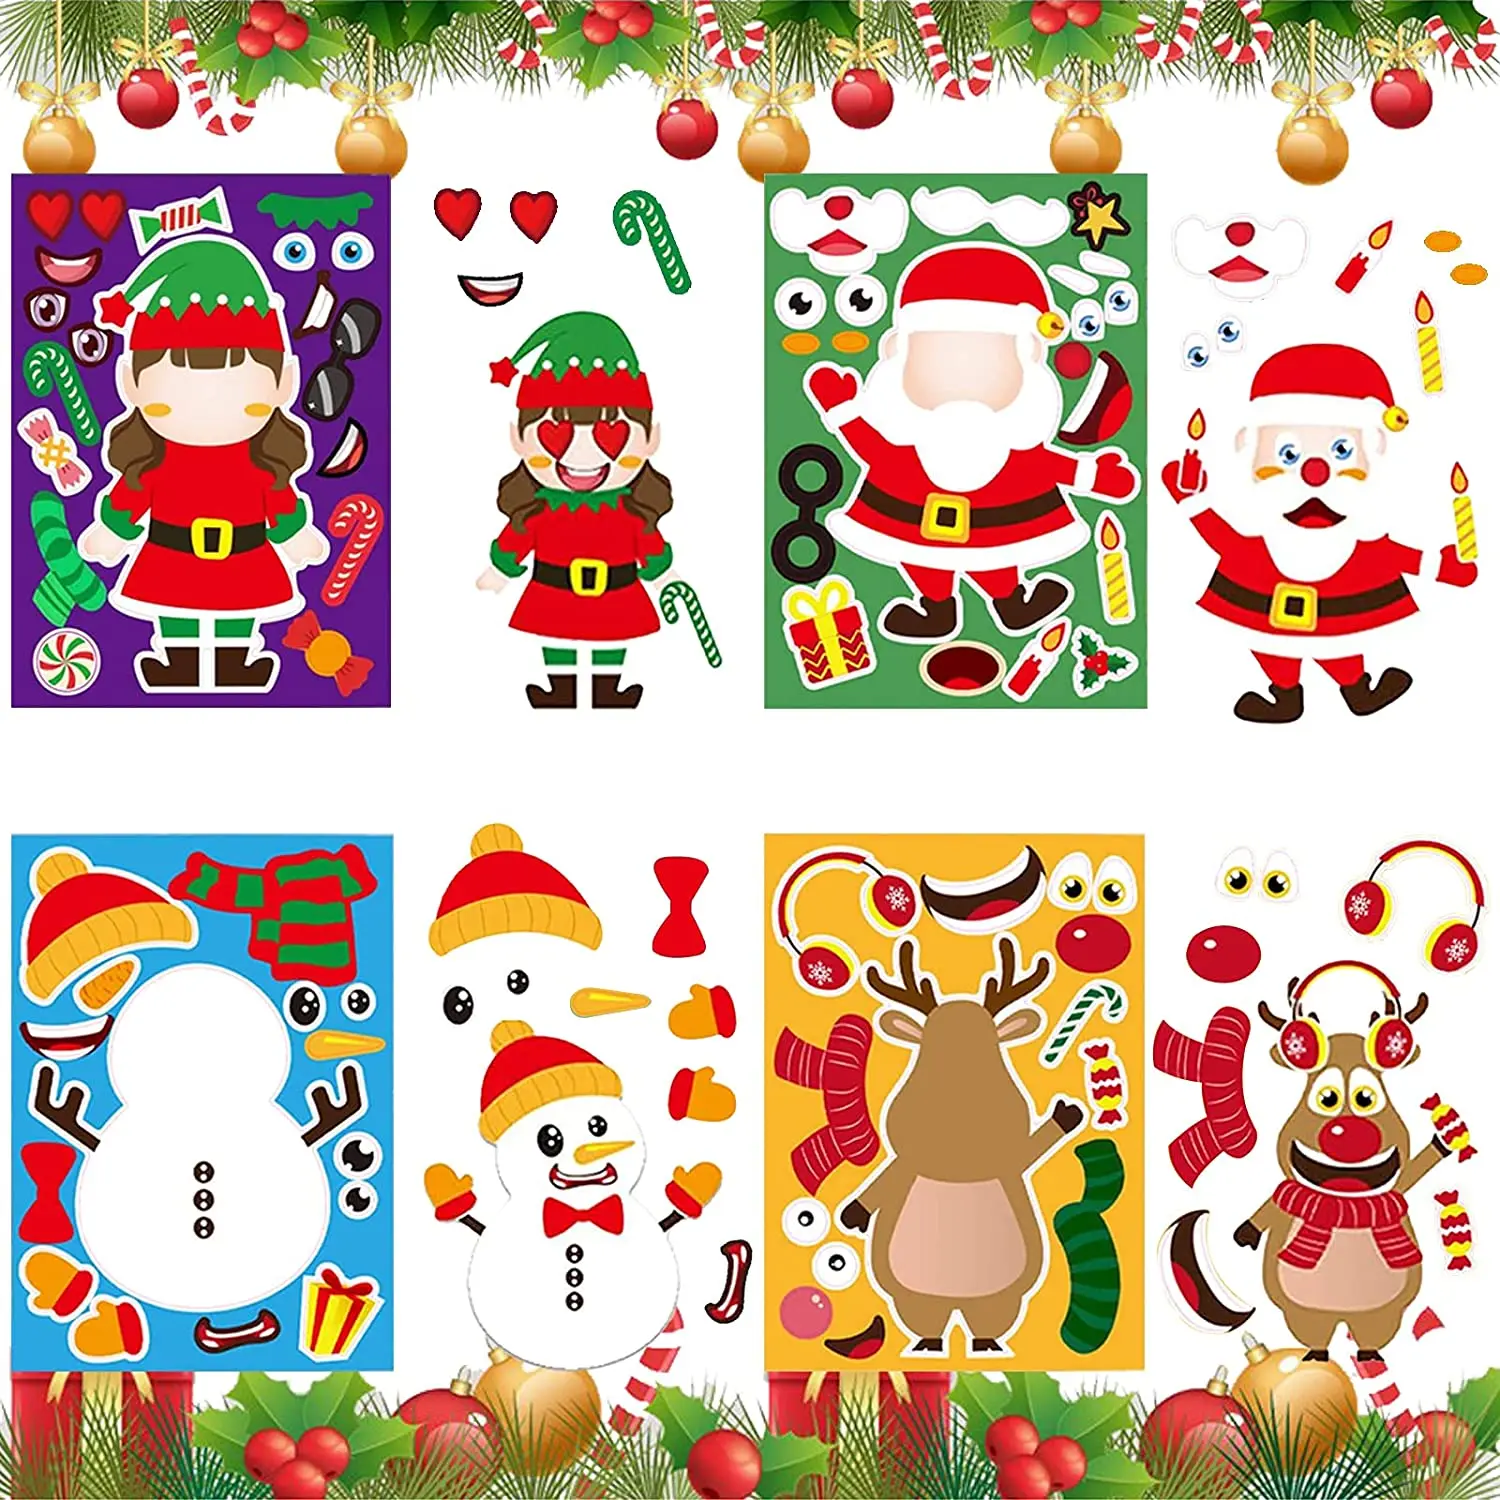 8 Pcs Christmas Make A Face Puzzle Stickers Games Self-Adhes